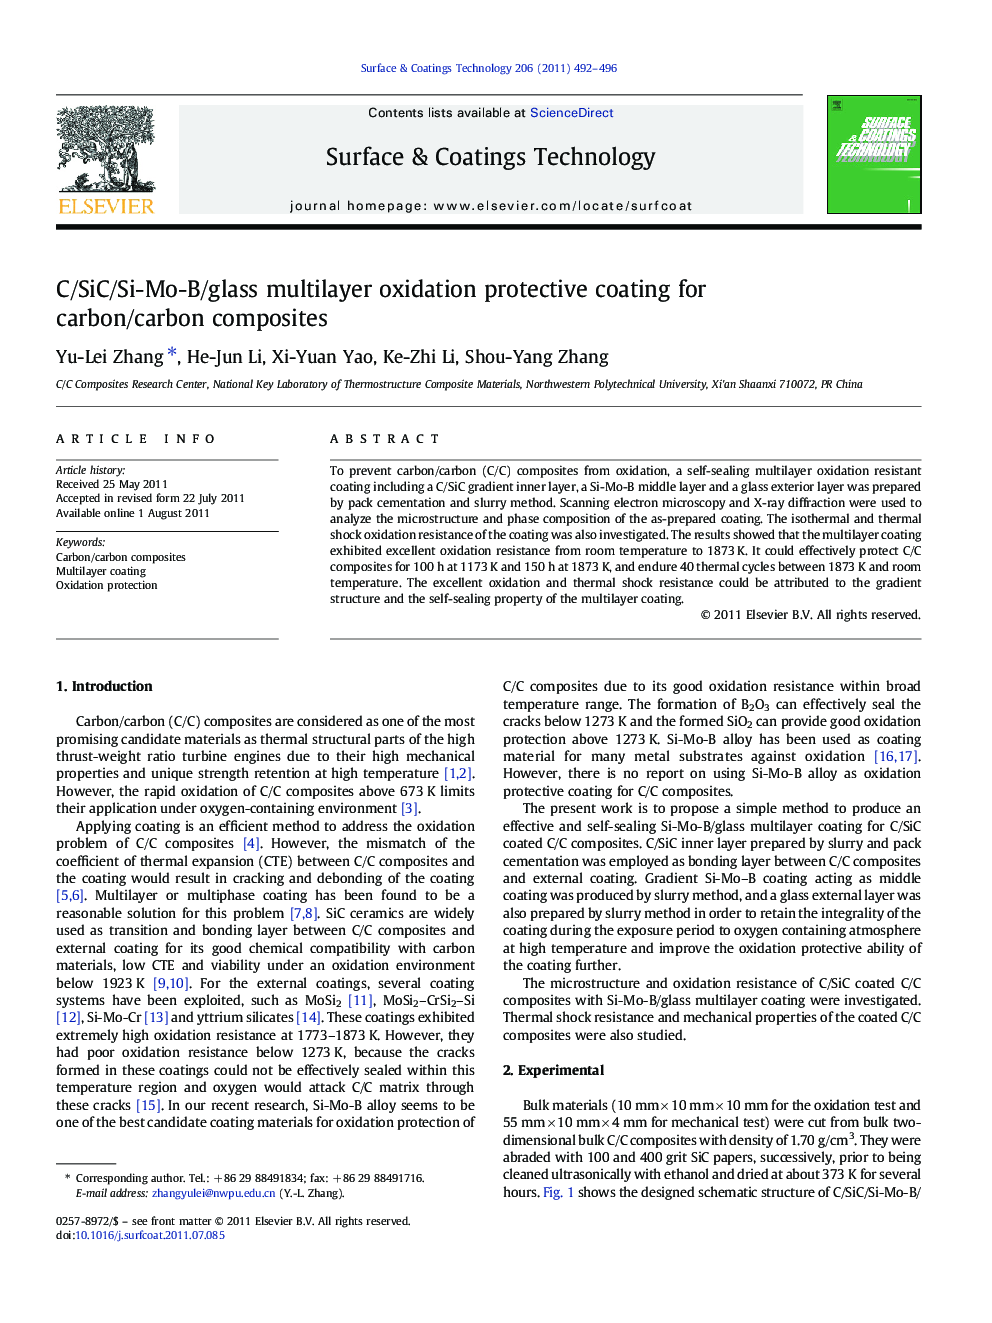 C/SiC/Si-Mo-B/glass multilayer oxidation protective coating for carbon/carbon composites